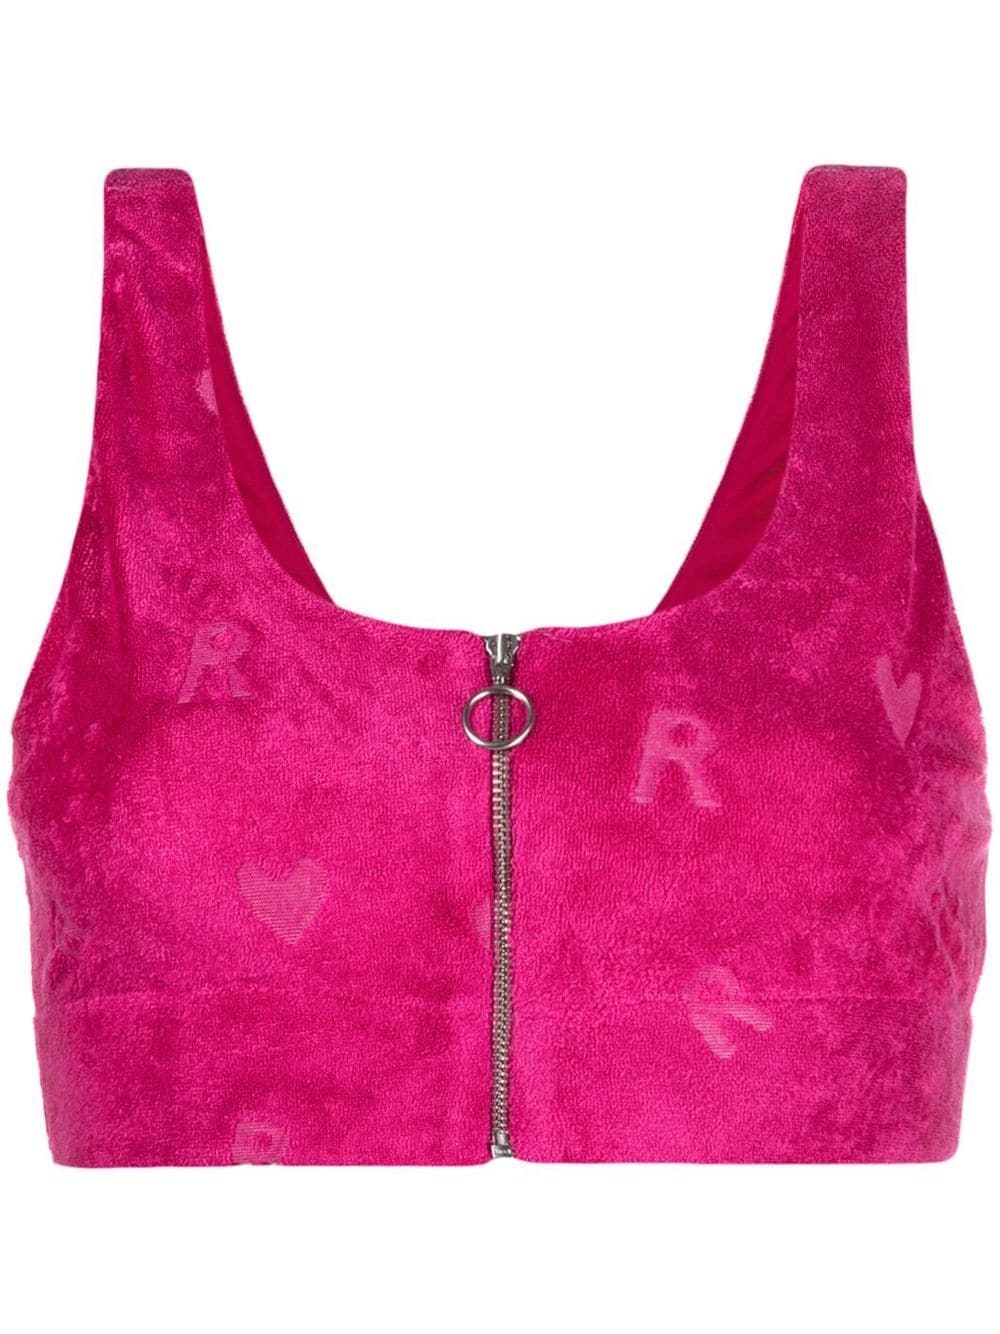 ROTATE heart motif cropped top - Pink